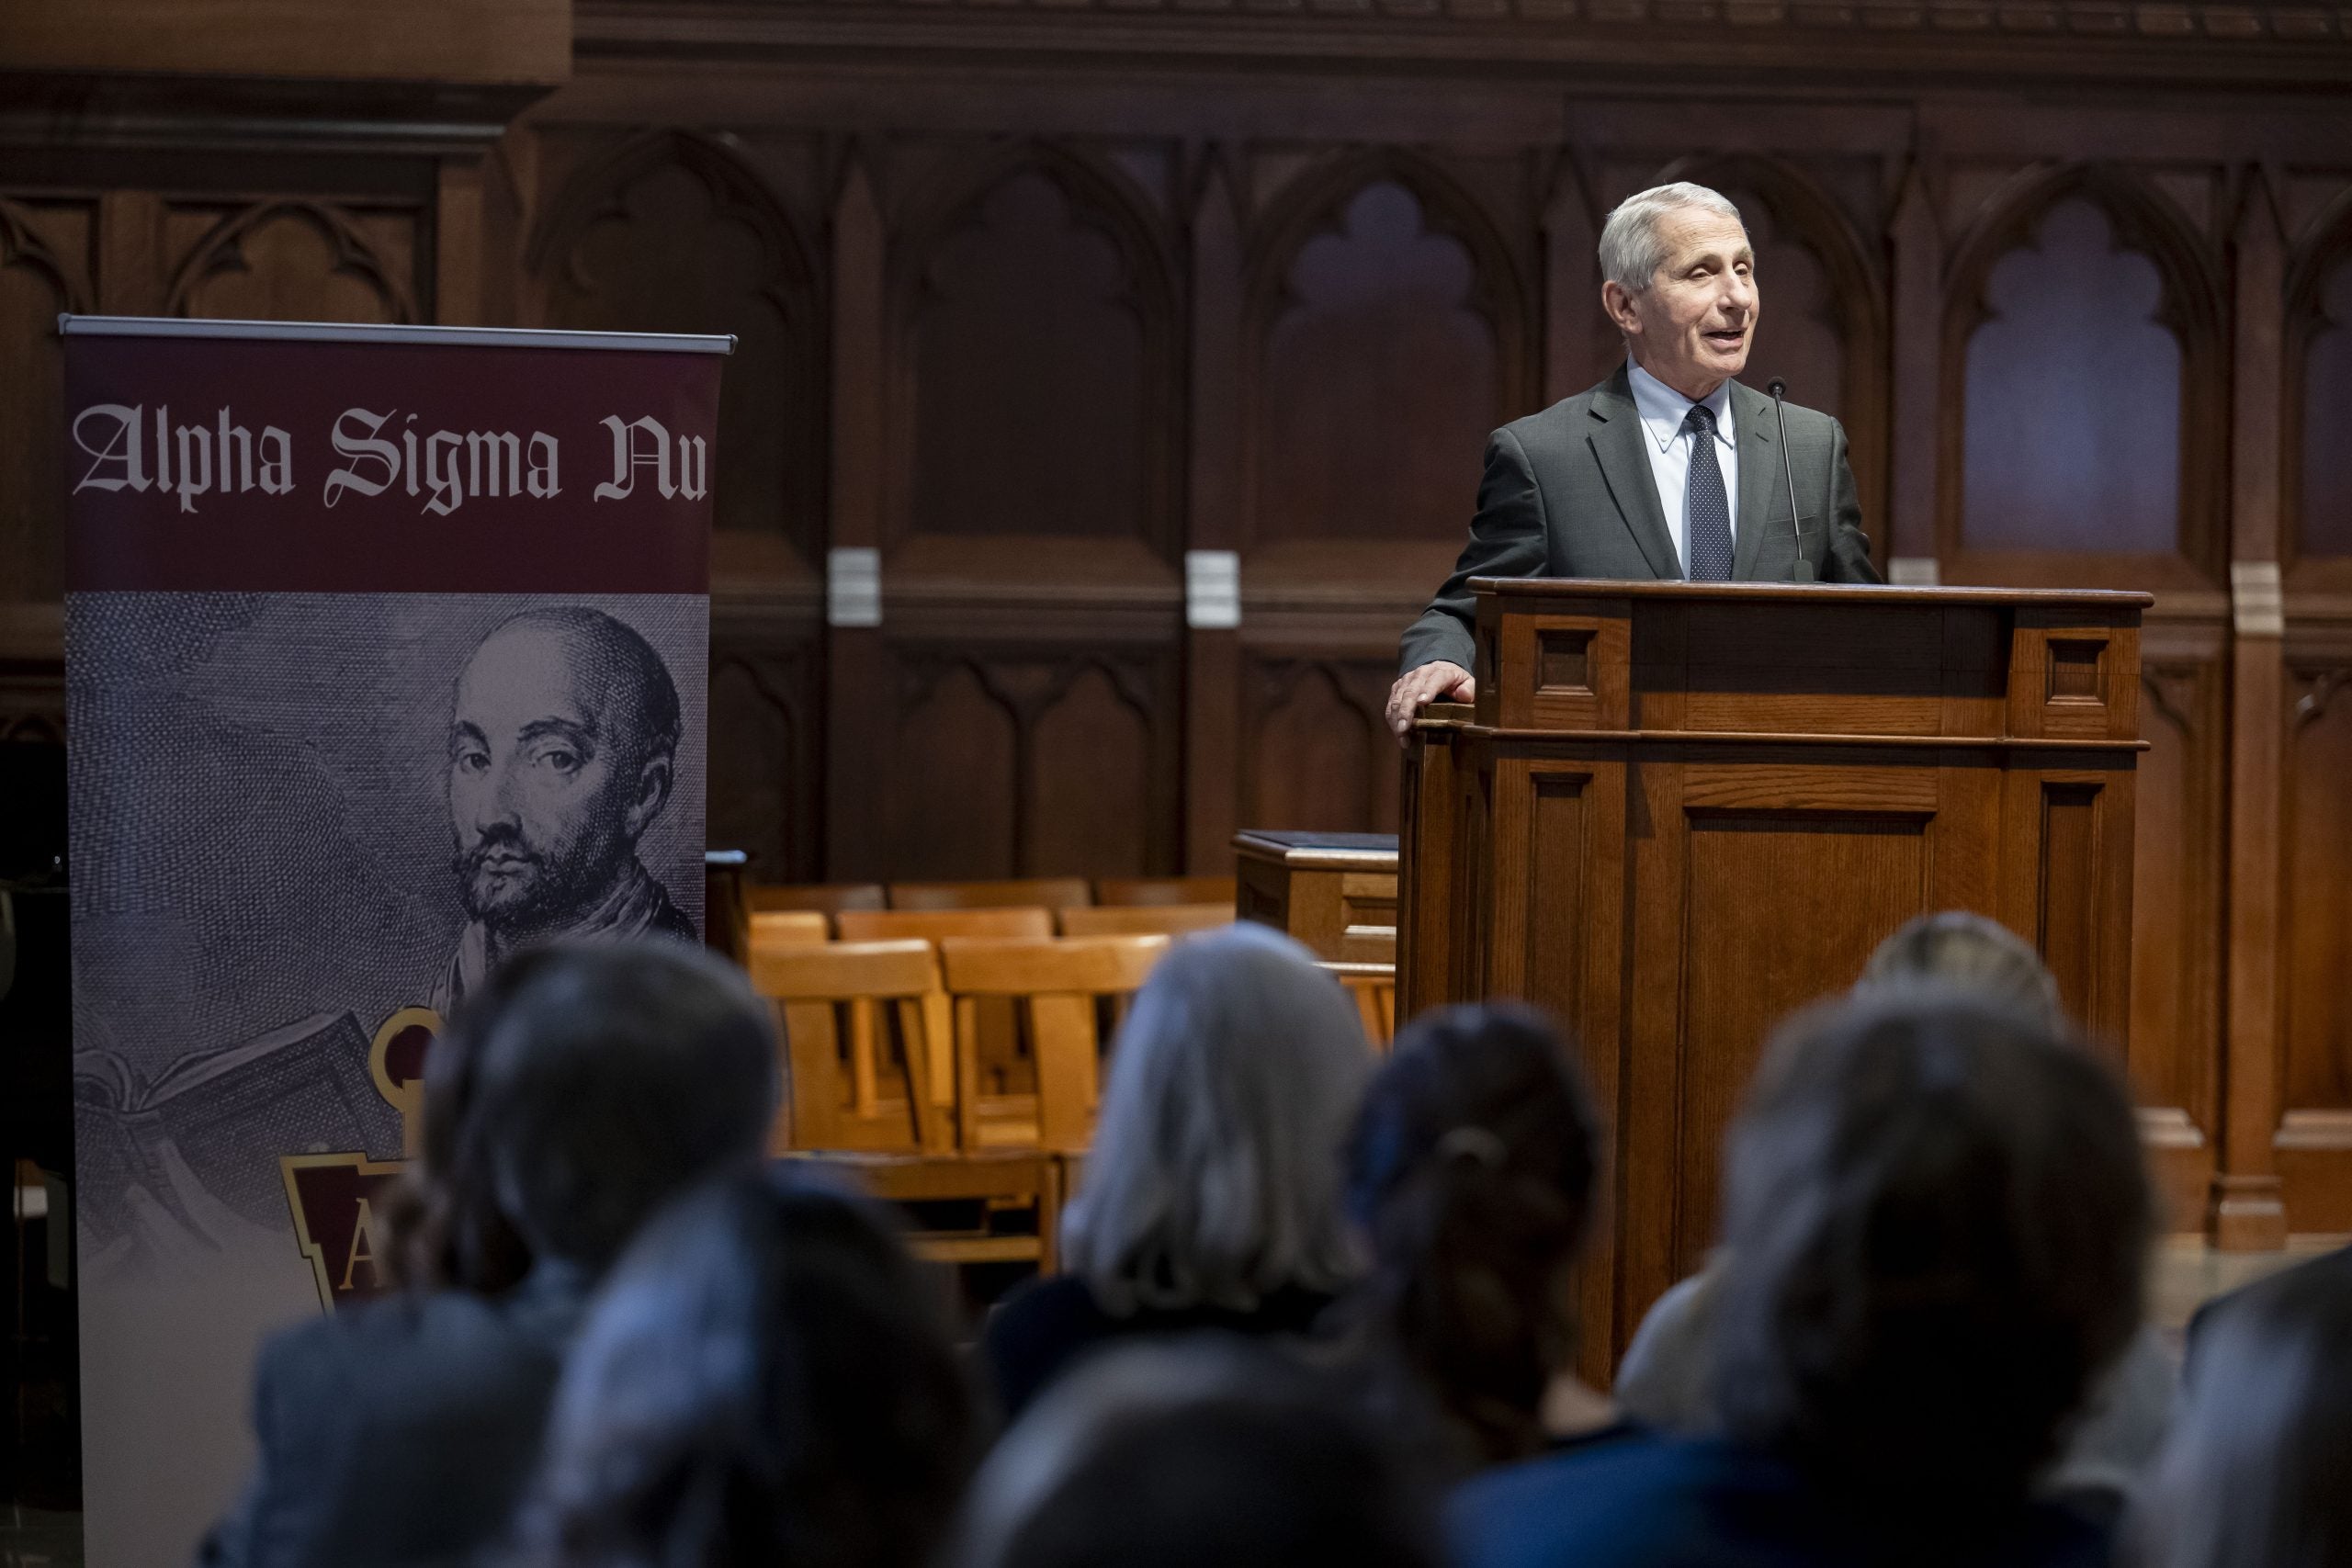 Dr. Fauci in Dahlgren chapel speaking at the podium with an Alpha Sigma Nu pop up banner next to him.